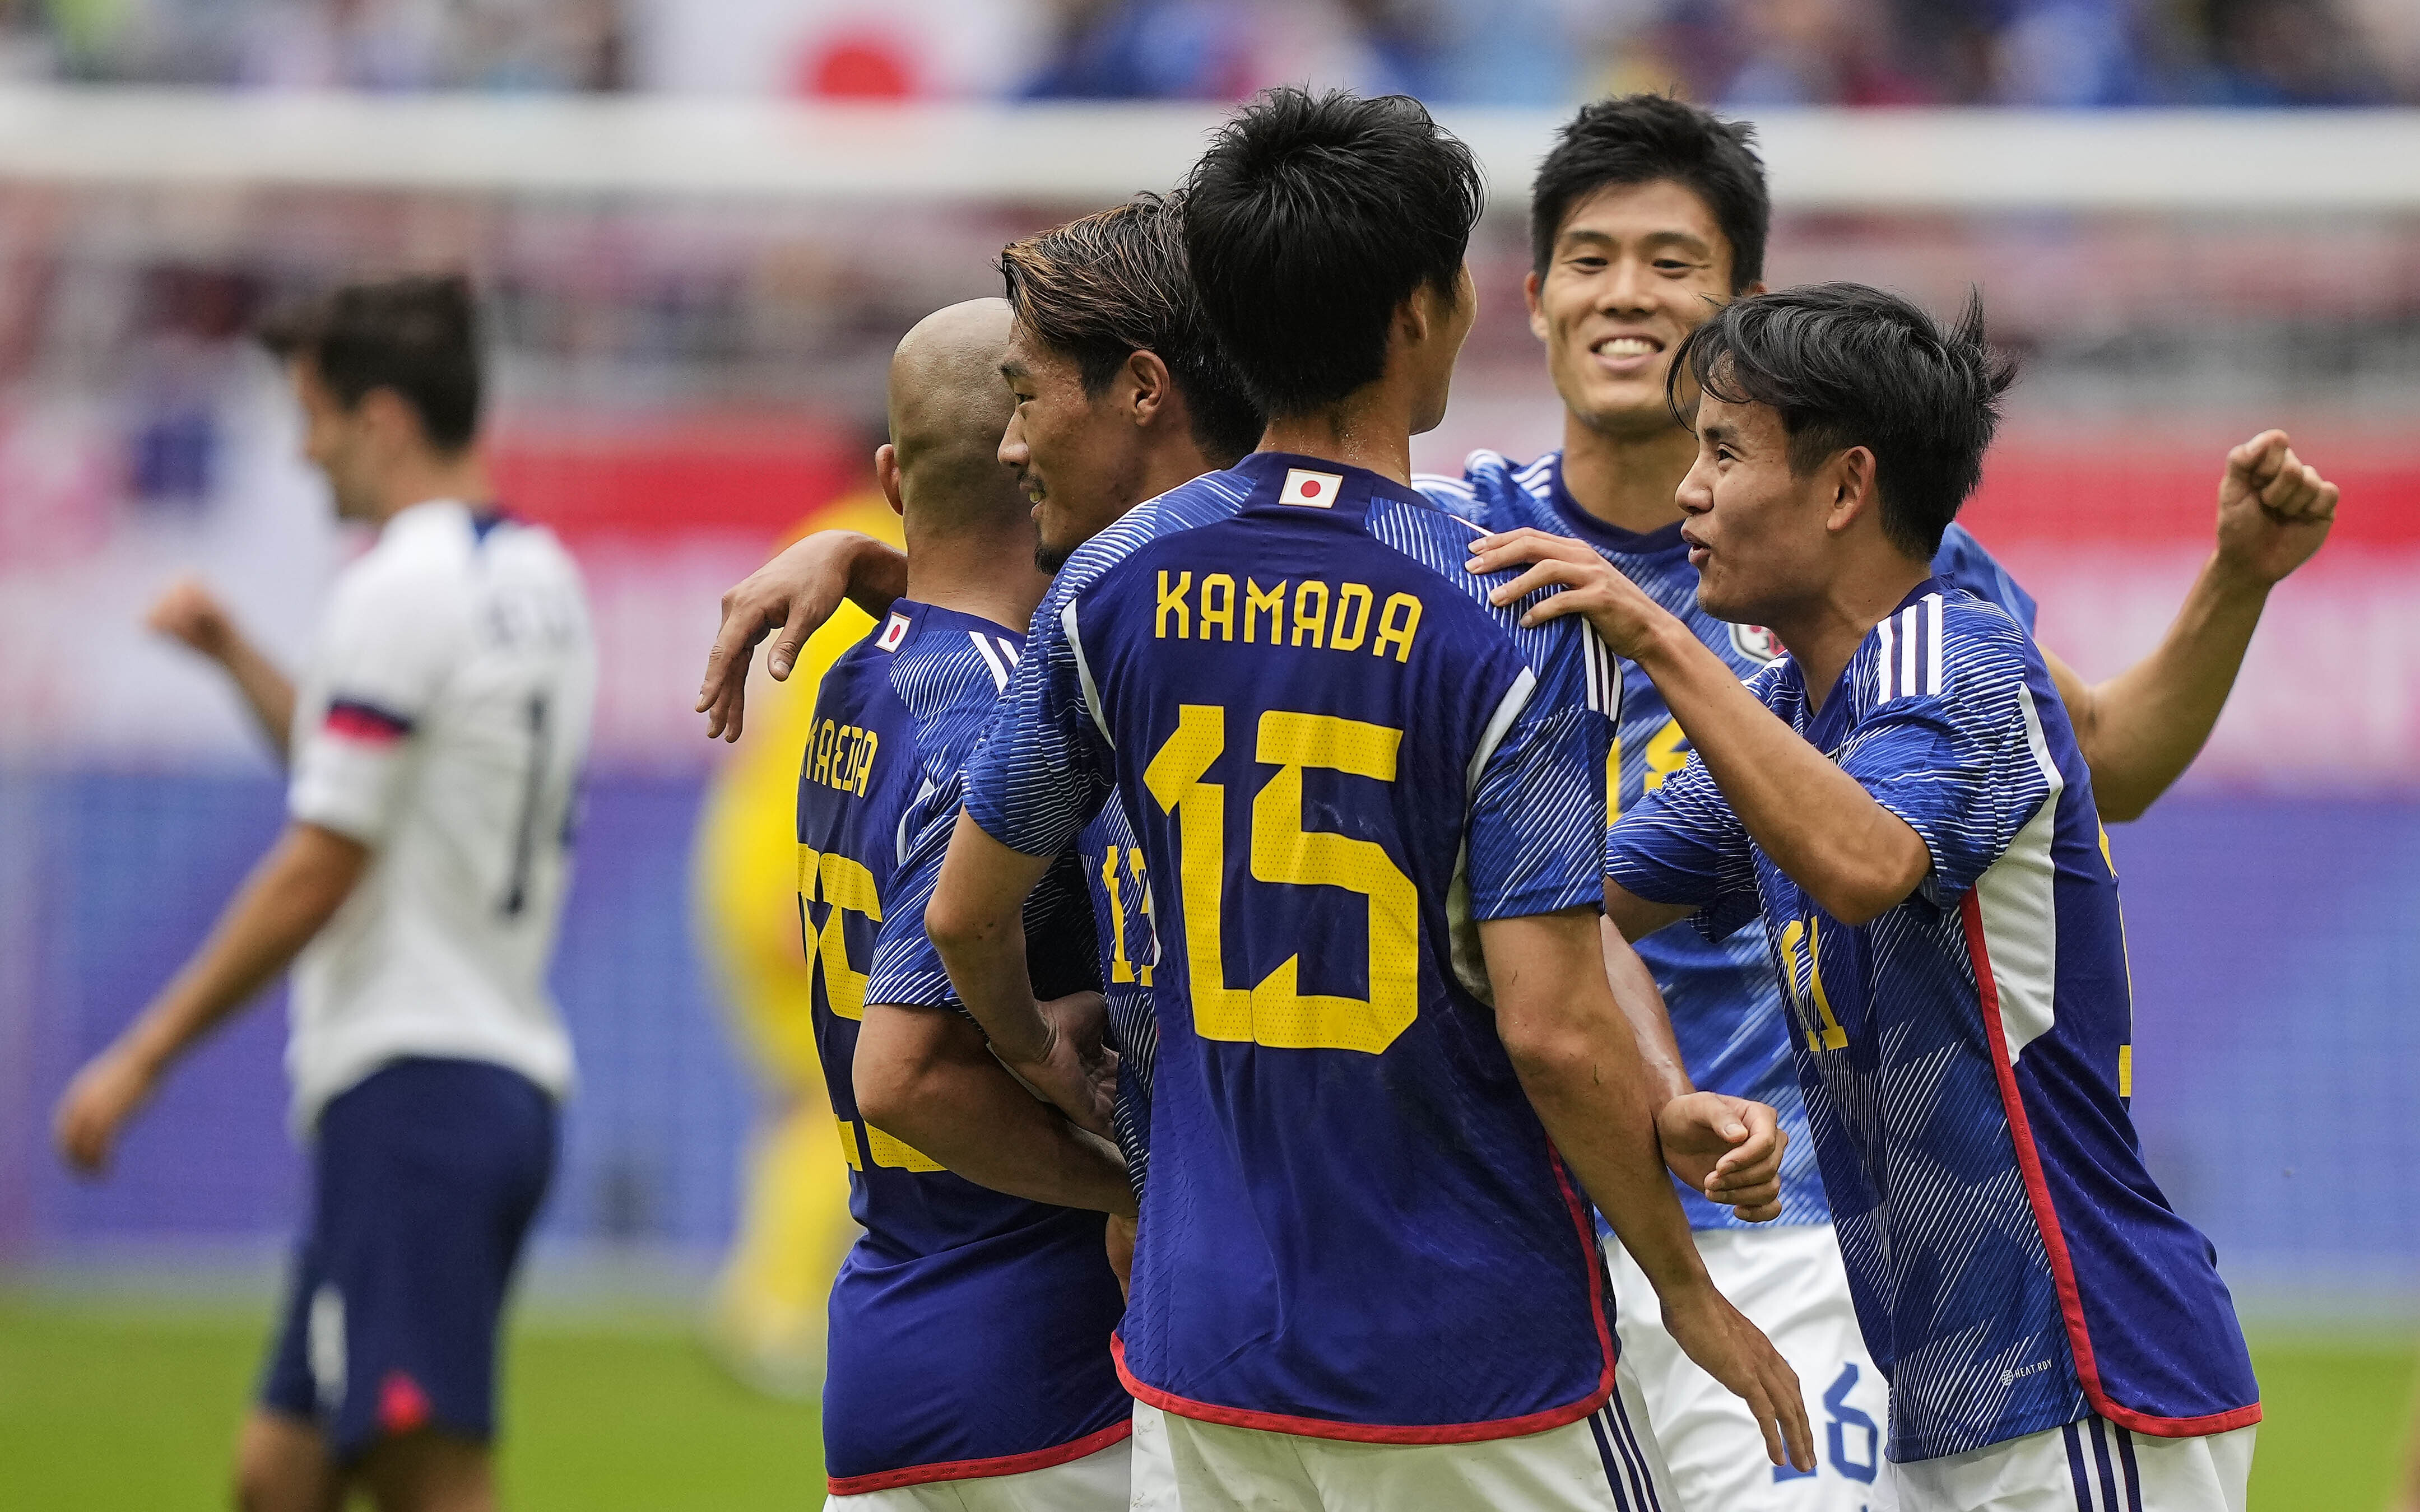 Lackluster Us Loses To Japan 2 0 In World Cup Warmup